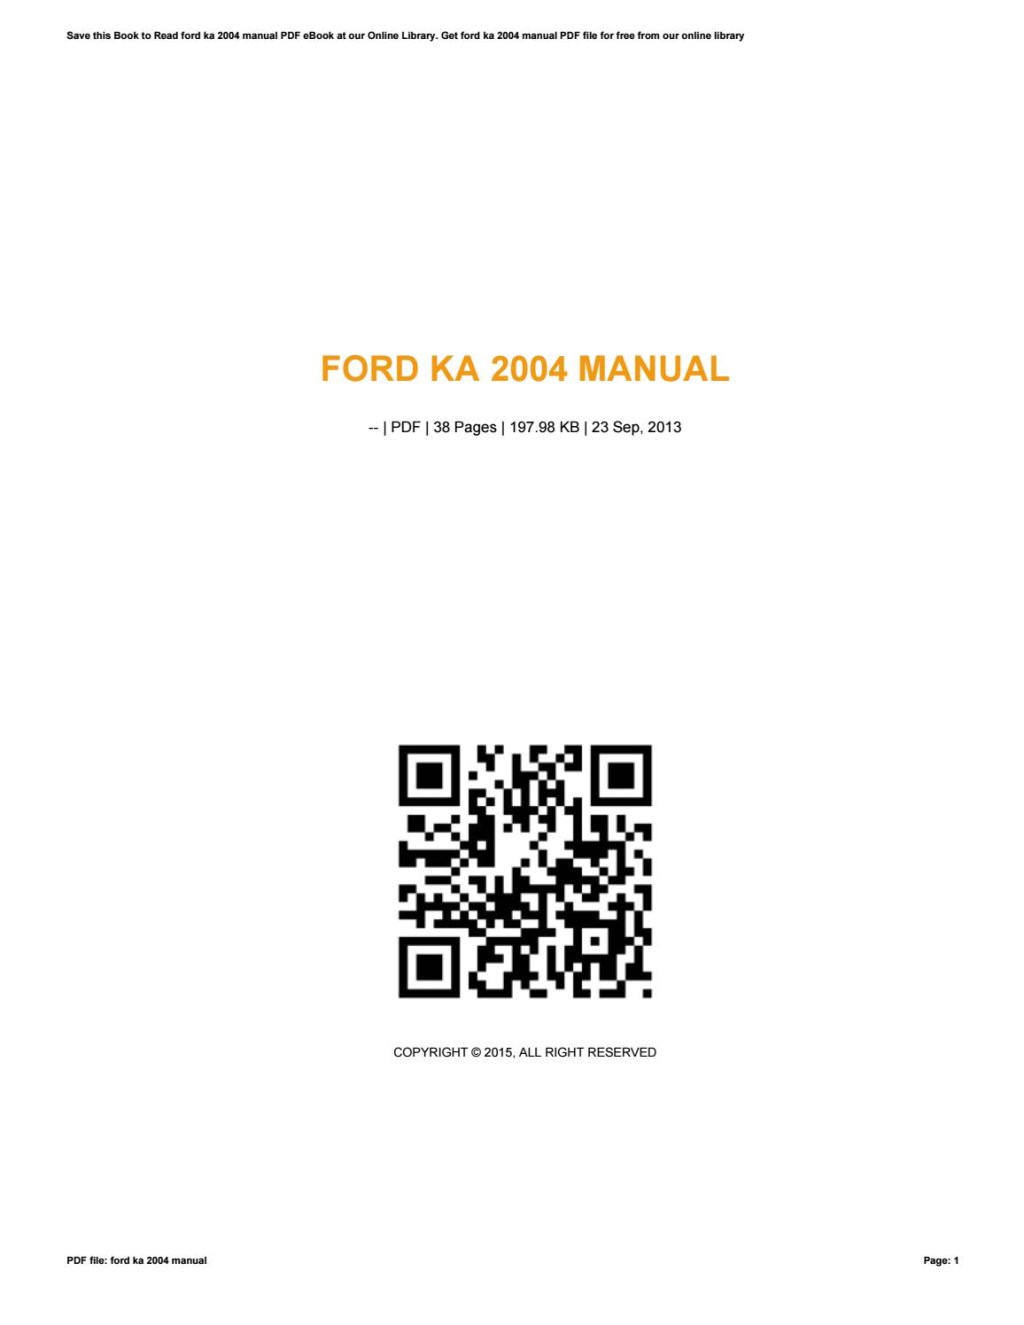 Picture of: Ford ka  manual by laoho – Issuu